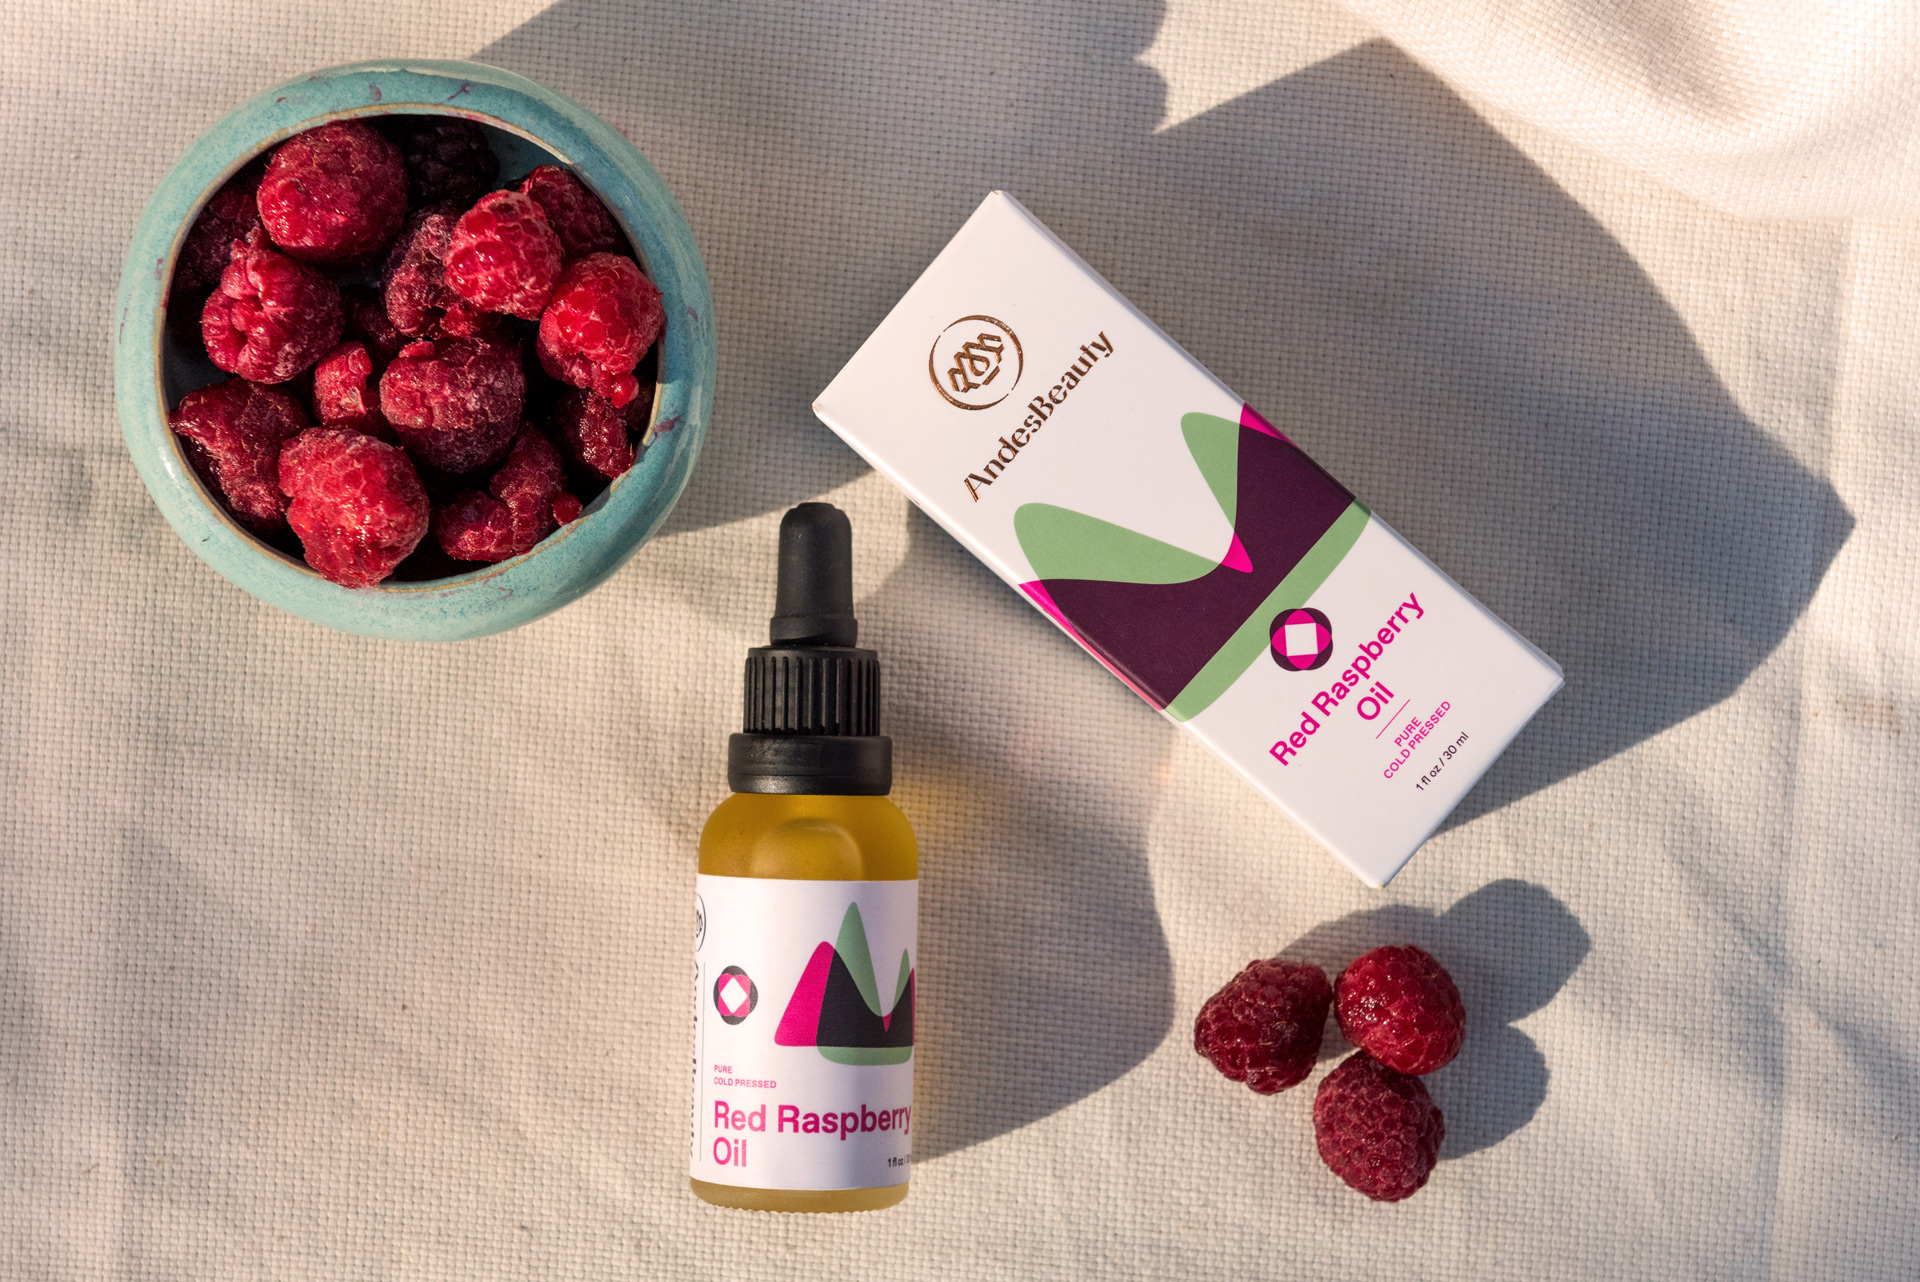 Red Raspberry Oil Andesbeauty 